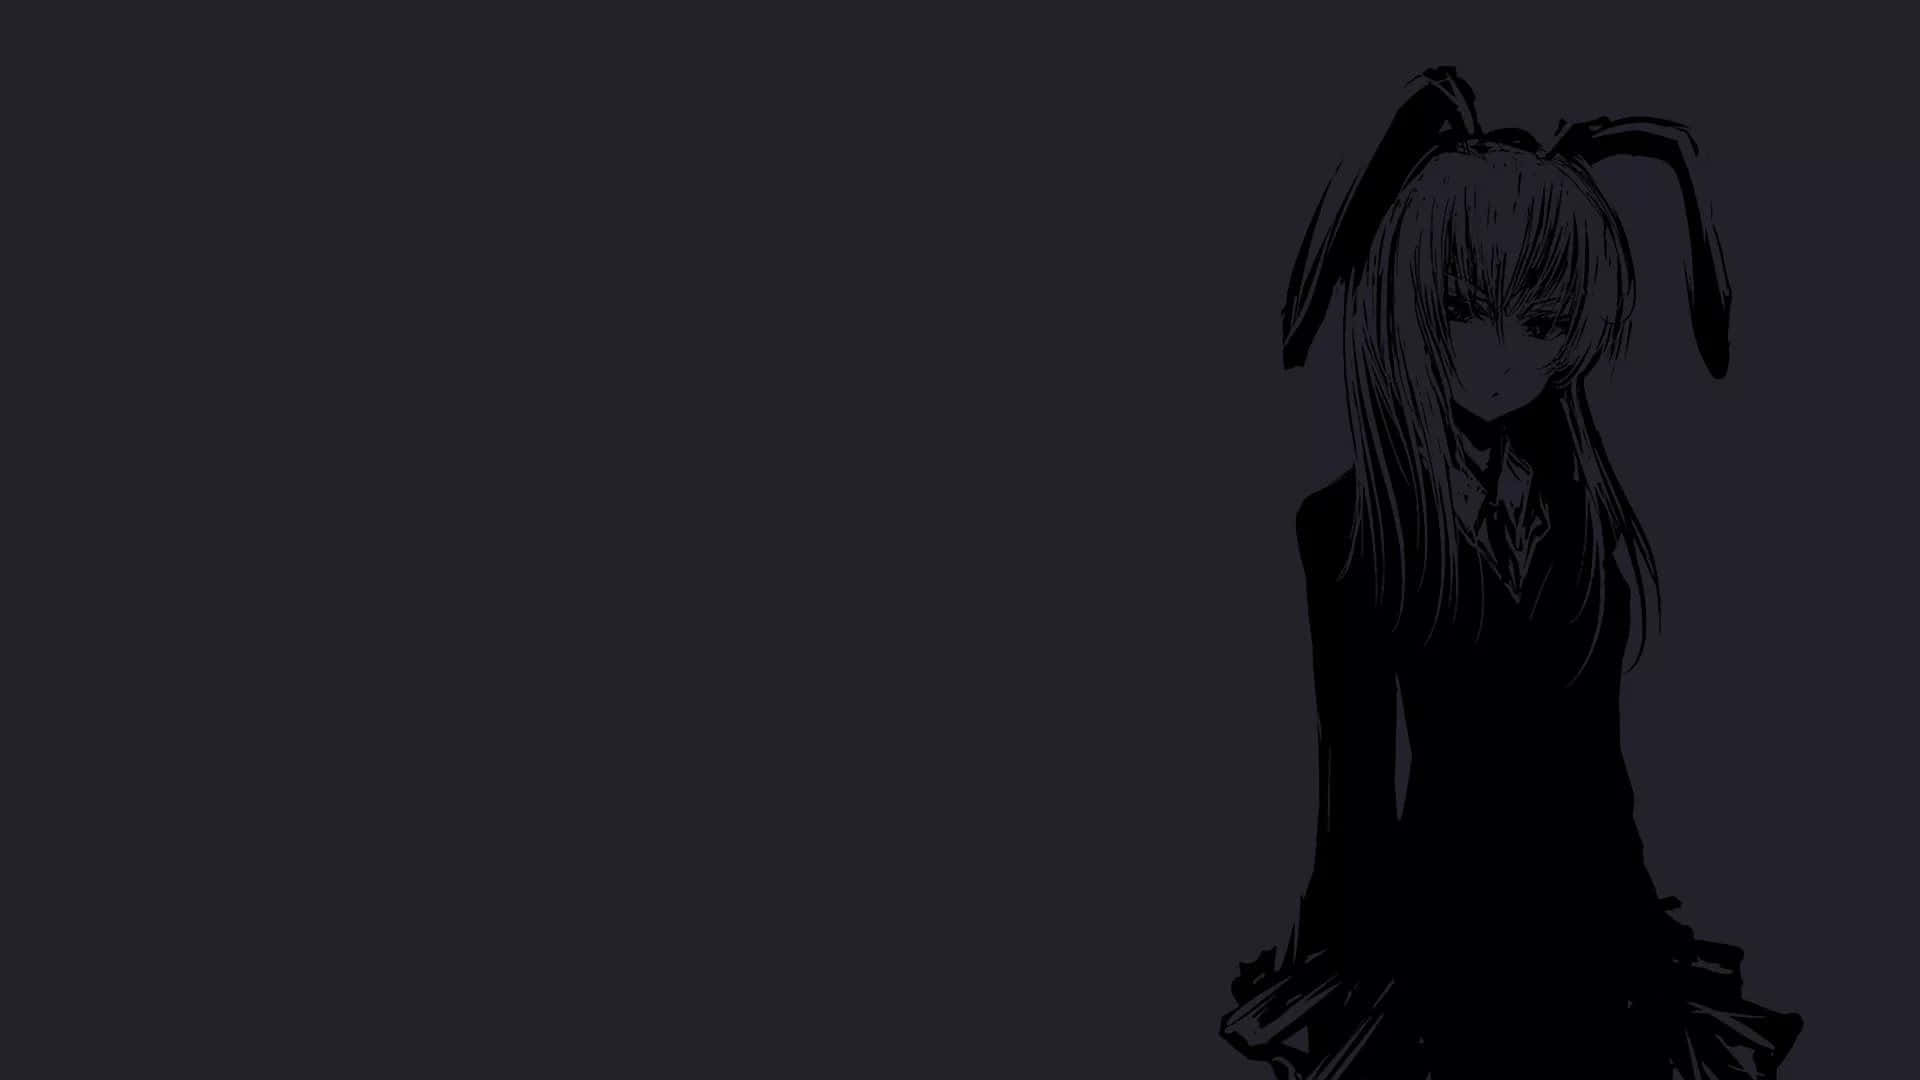 A Girl In Black And White With Long Hair Wallpaper